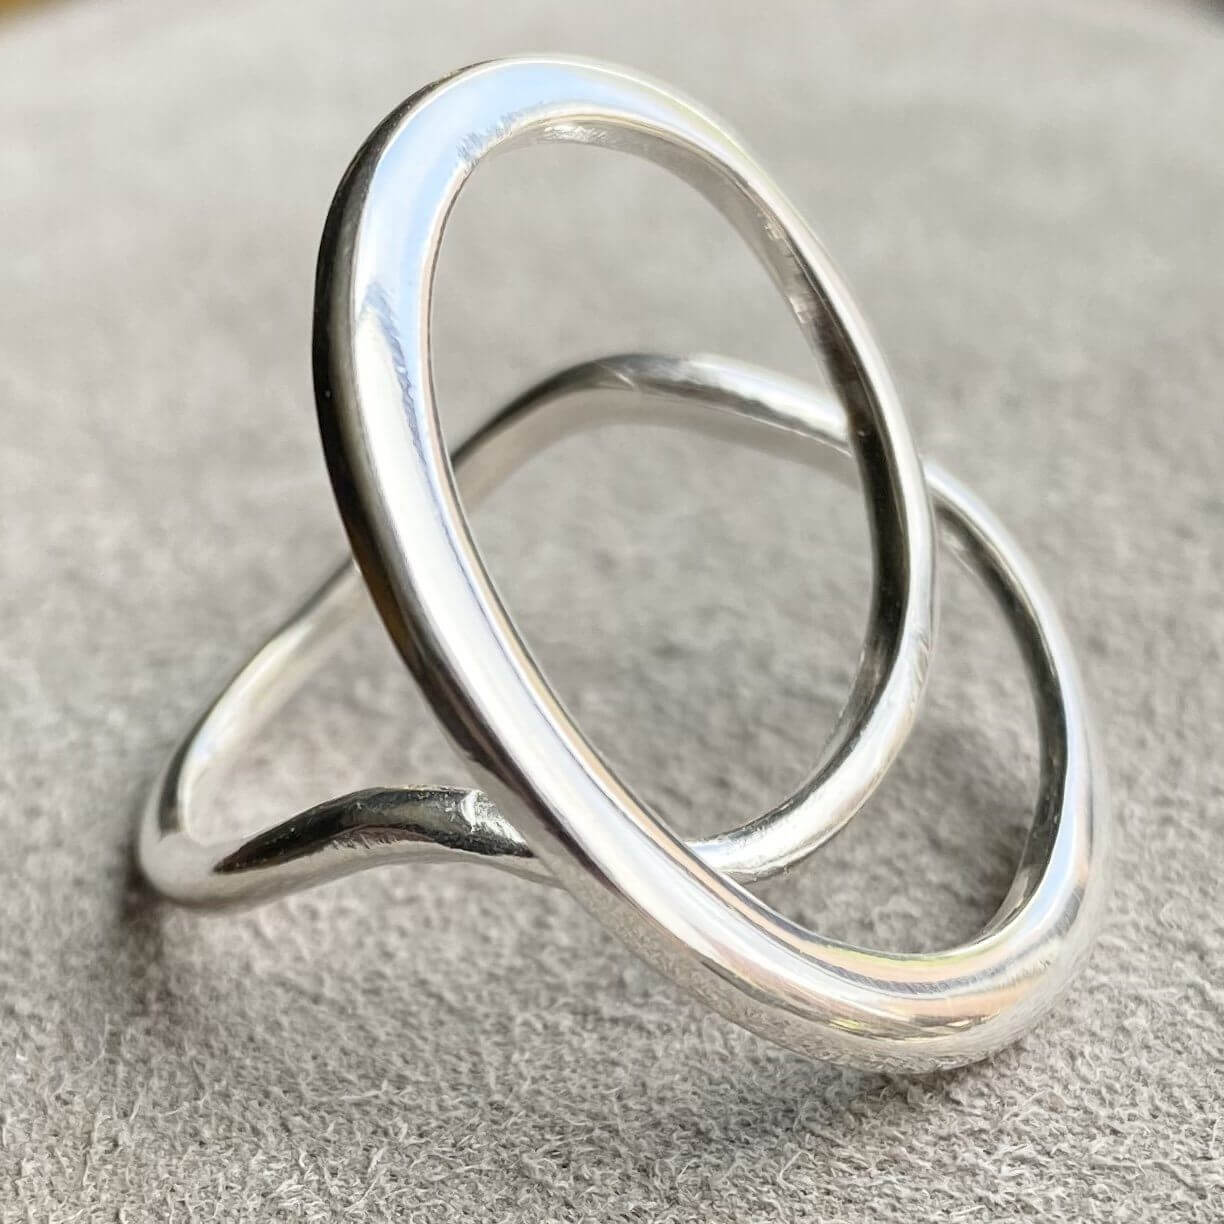 Contemporary Whirlpool Sterling Silver Wrap Around Ring - Twelve Silver Trees